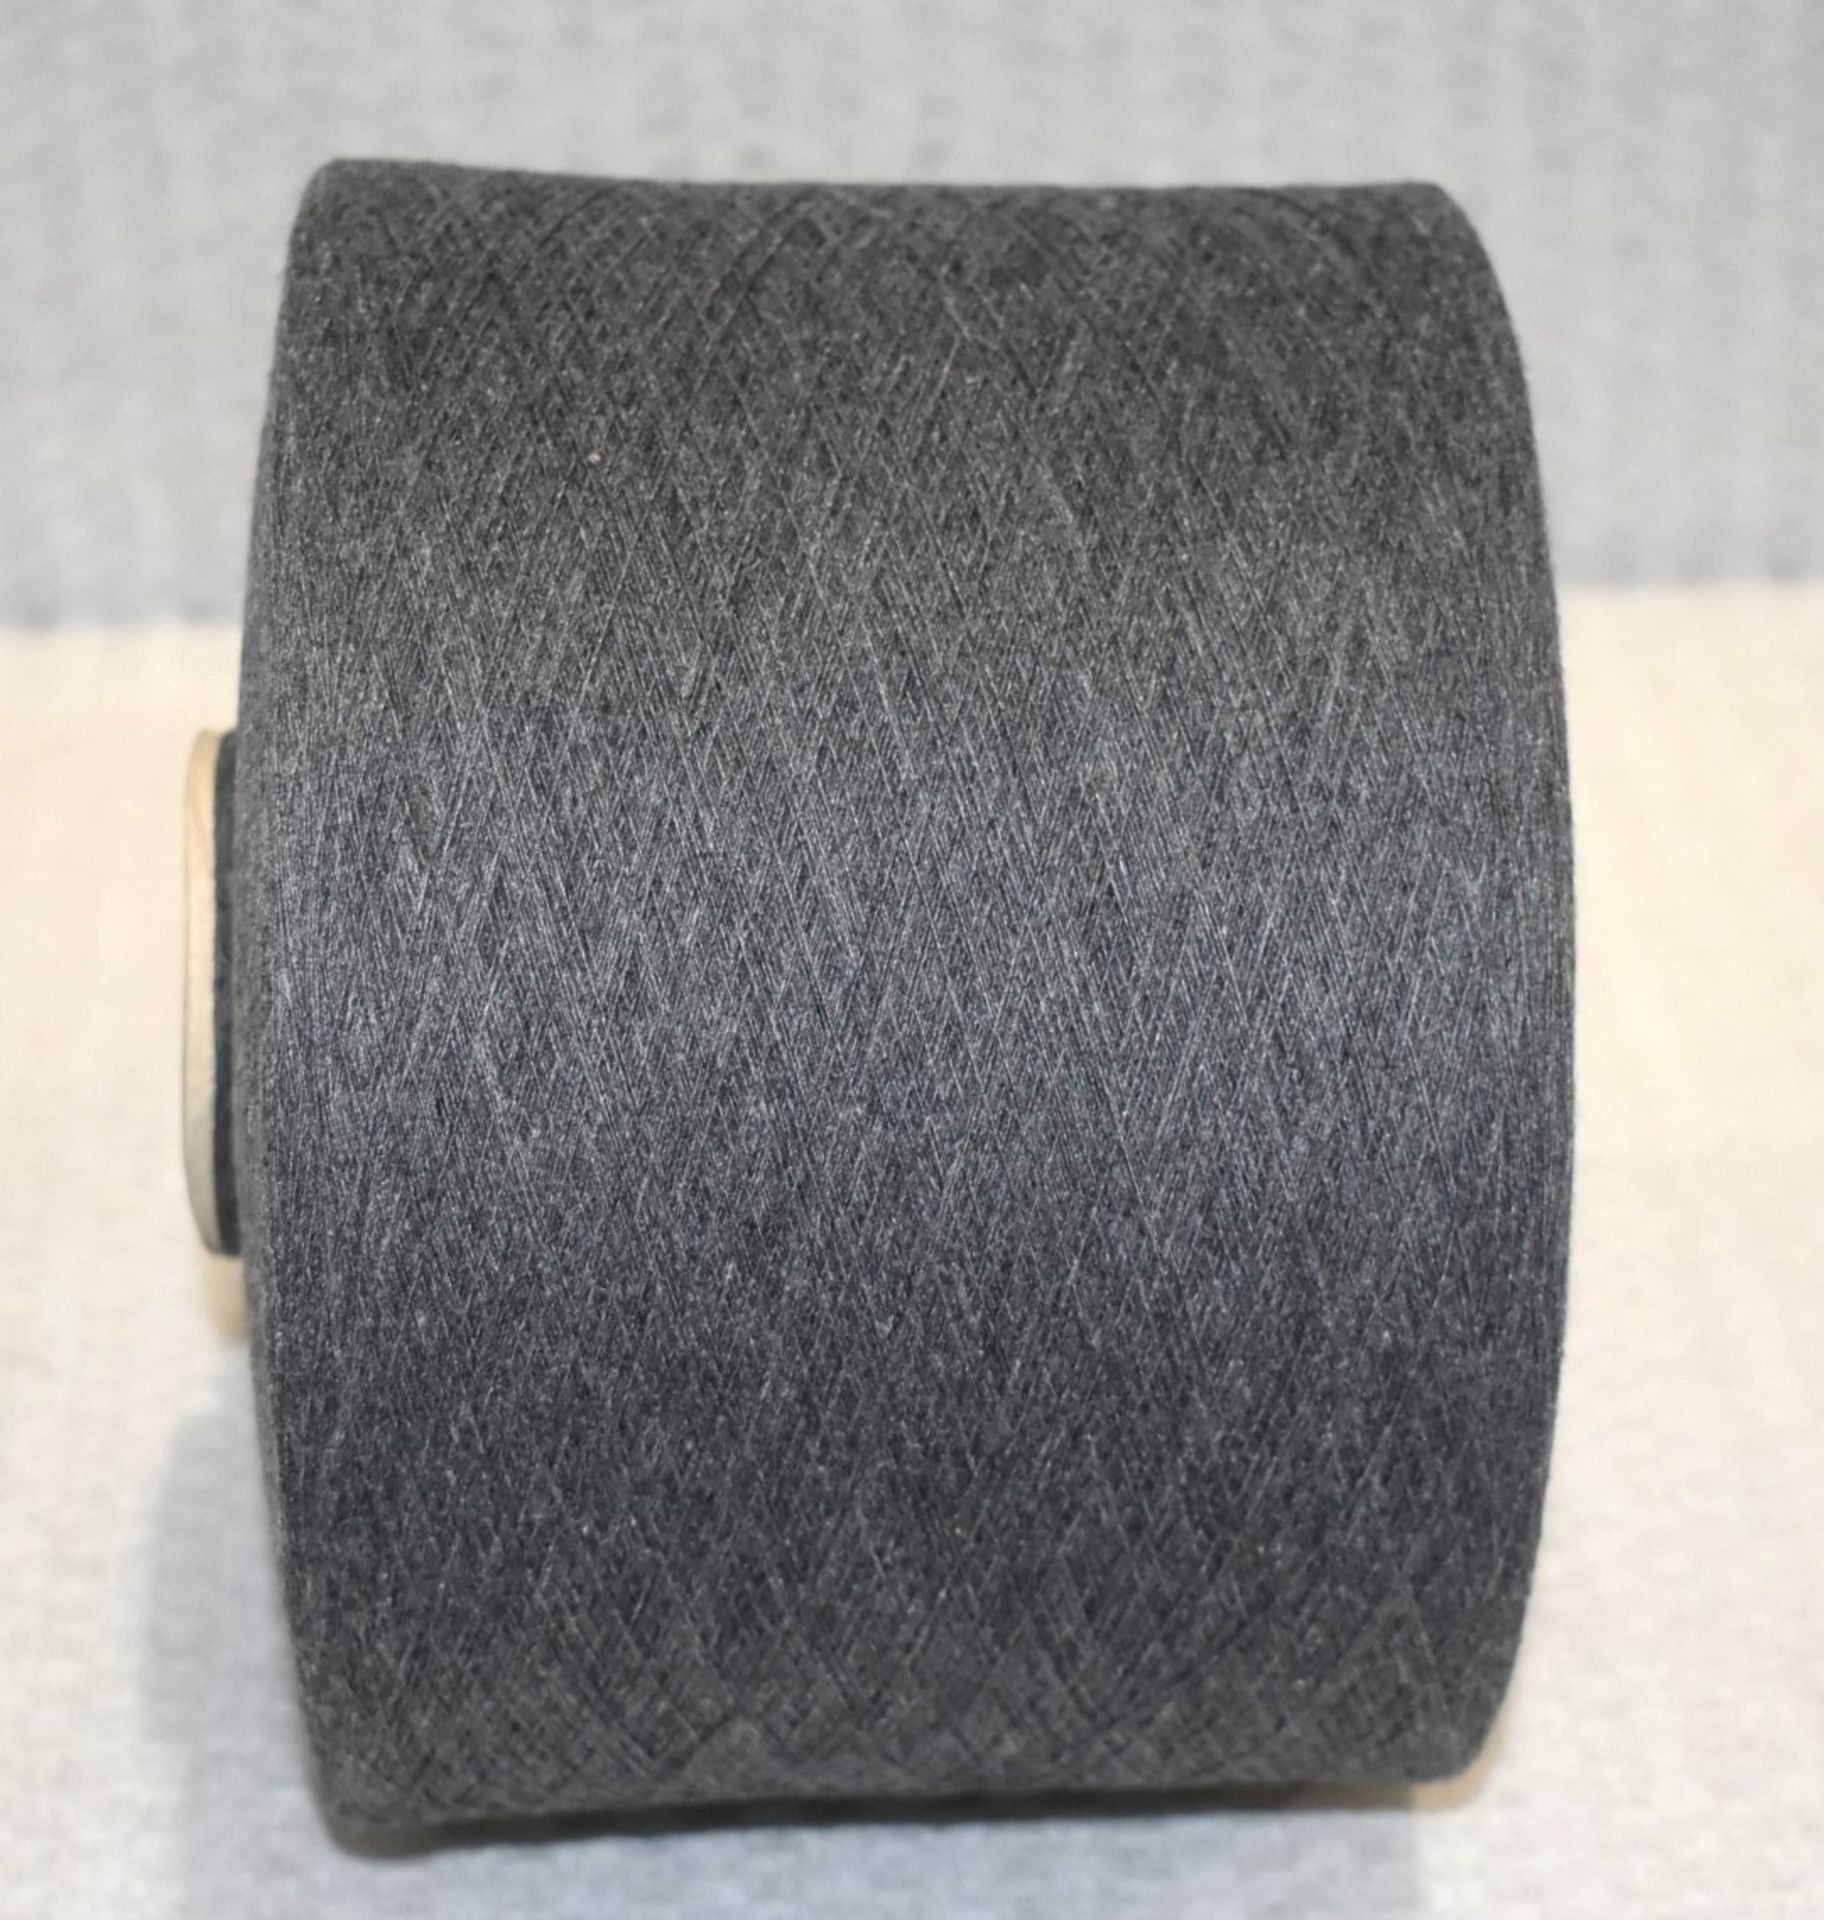 1 x Cone of 1/13 MicroCotton Knitting Yarn - Mid Grey - Approx Weight: 2,500g - New Stock ABL Yarn - Image 9 of 10